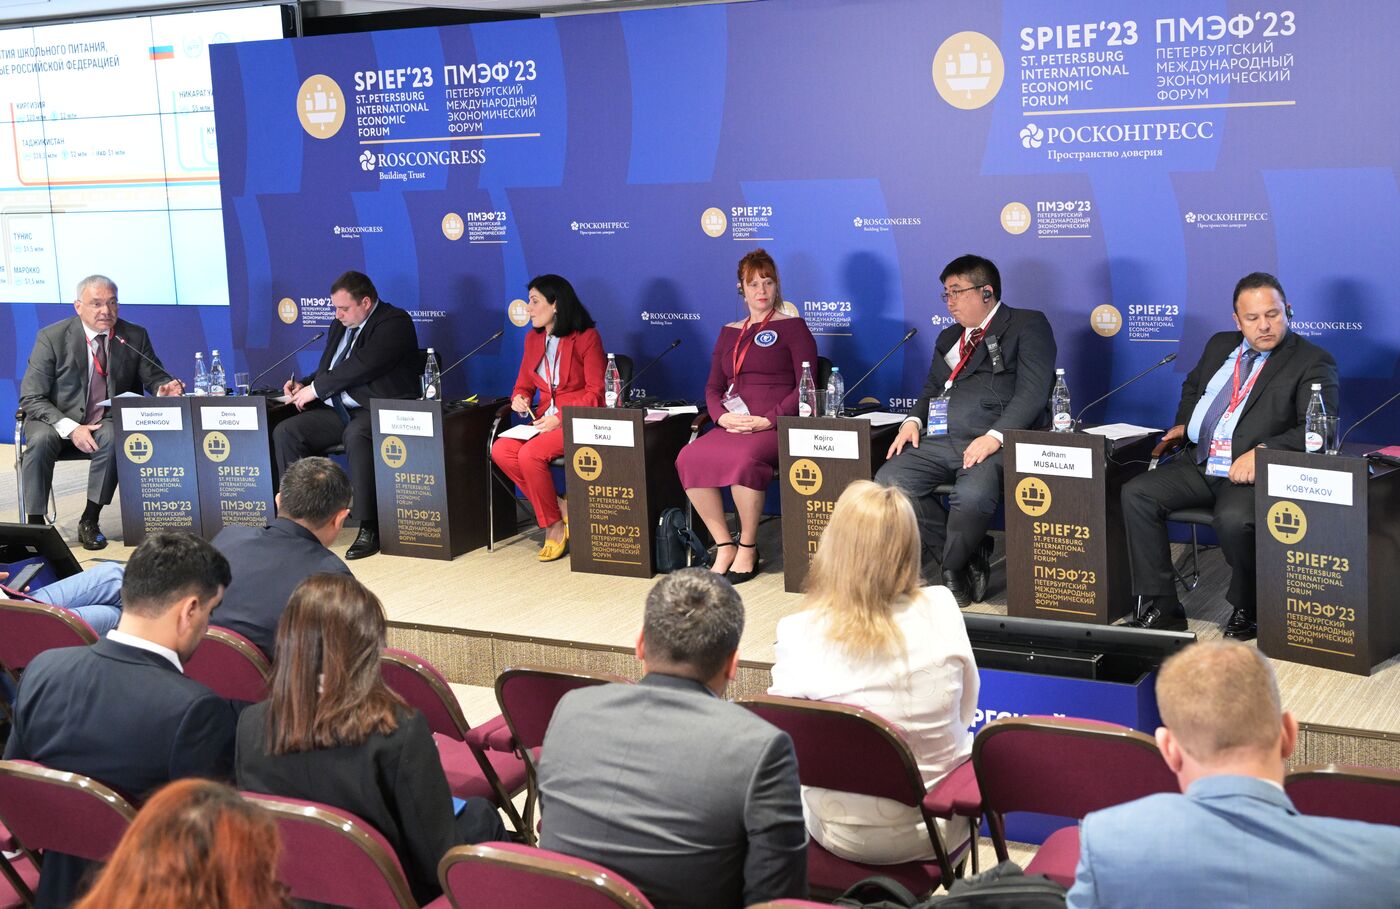 SPIEF-2023. Social Support Projects for the Population as Drivers of Economic Development